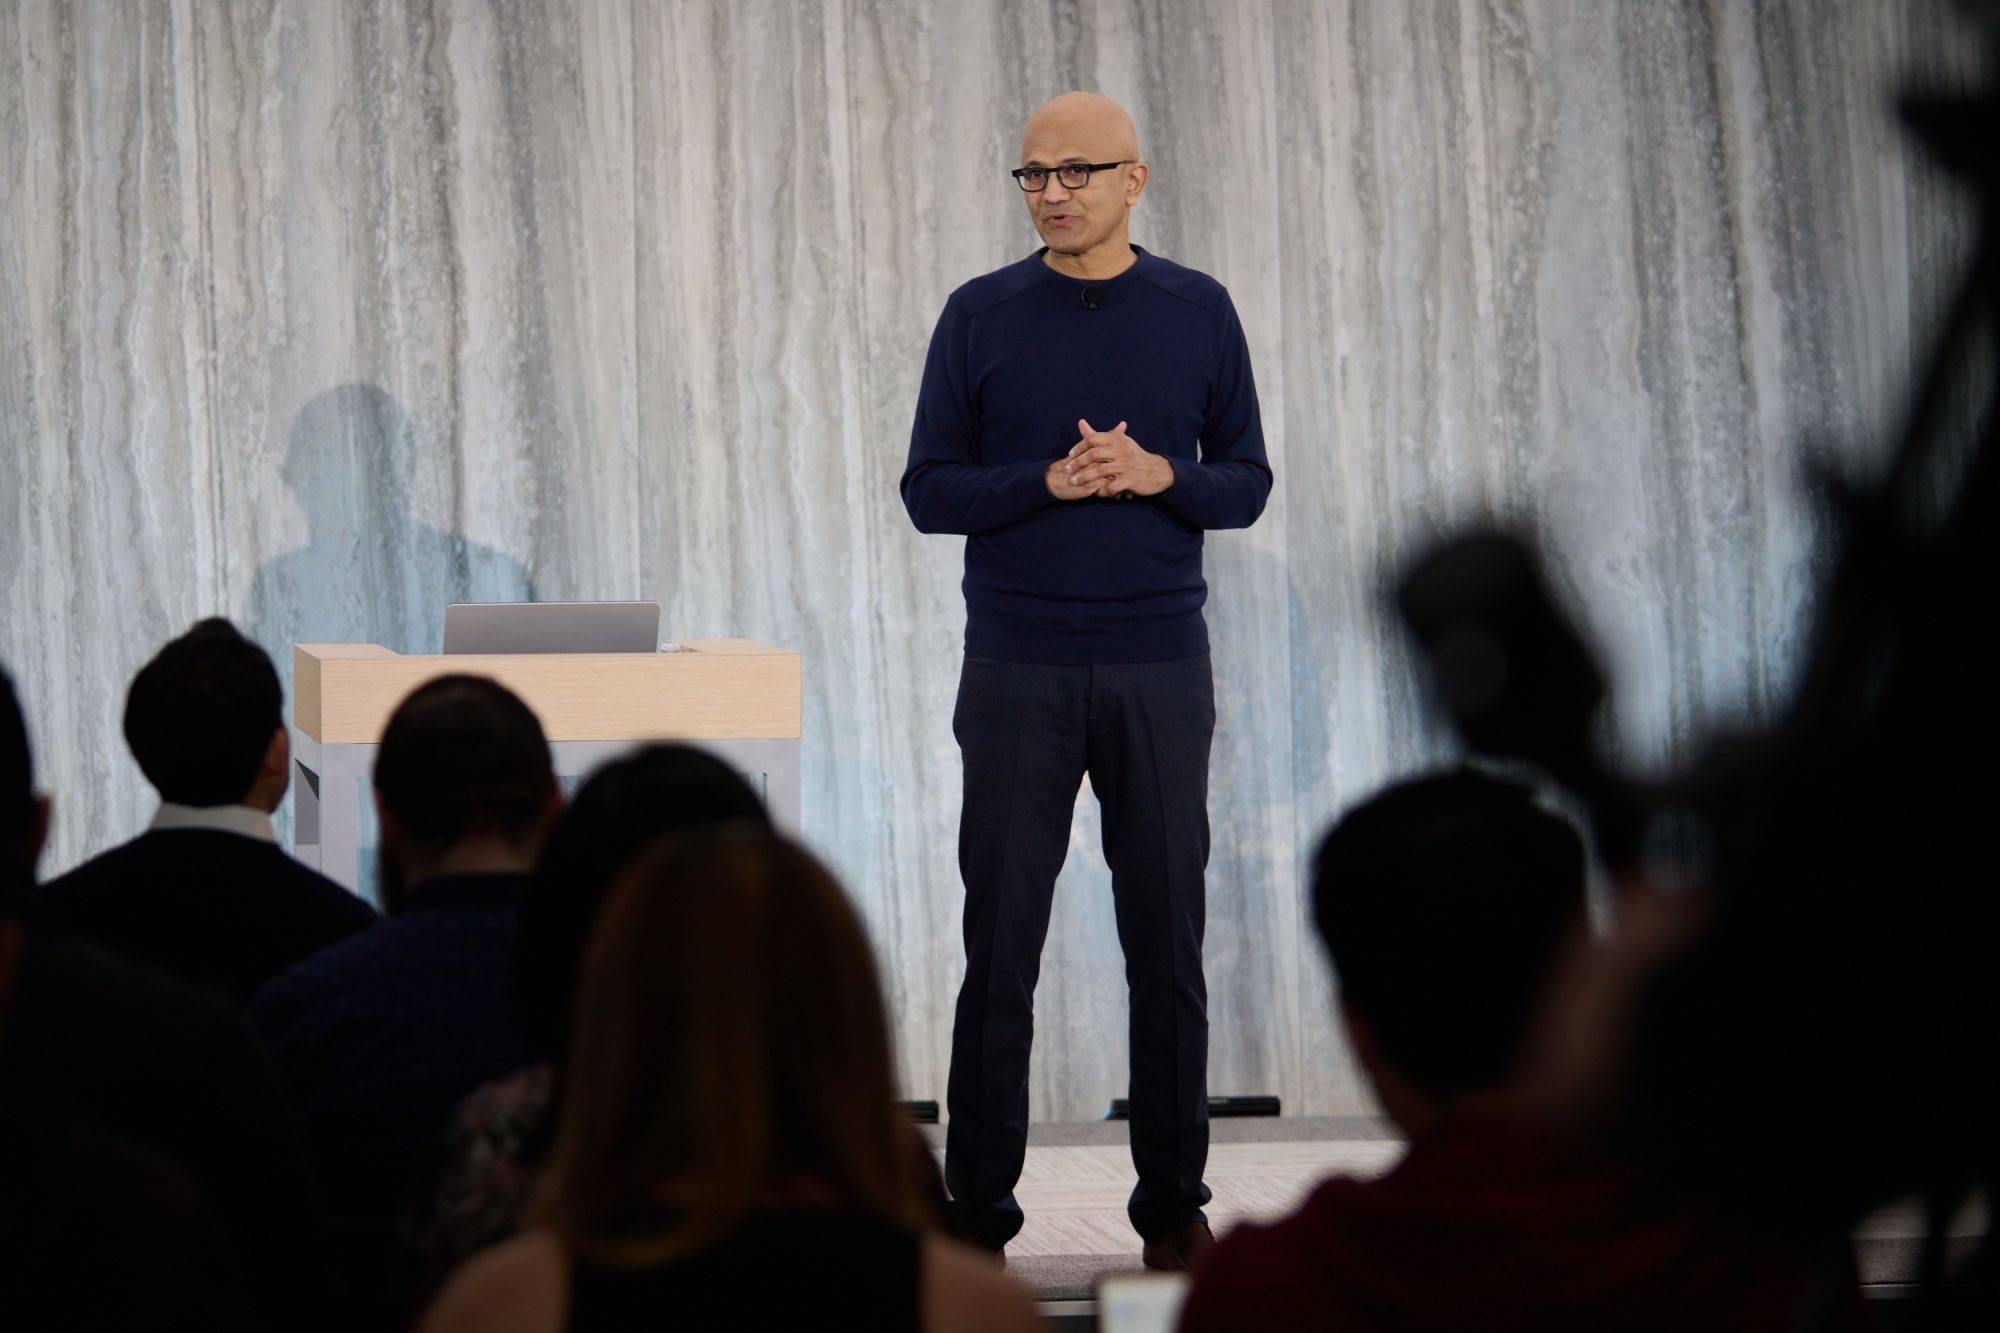 Satya Nadella, chief executive officer of Microsoft, speaks during an event at the company's headquarters in Redmond, Washington, on Tuesday. Microsoft unveiled new versions of its Bing internet-search engine and Edge browser powered by the newest technology from ChatGPT maker OpenAI. | BLOOMBERG